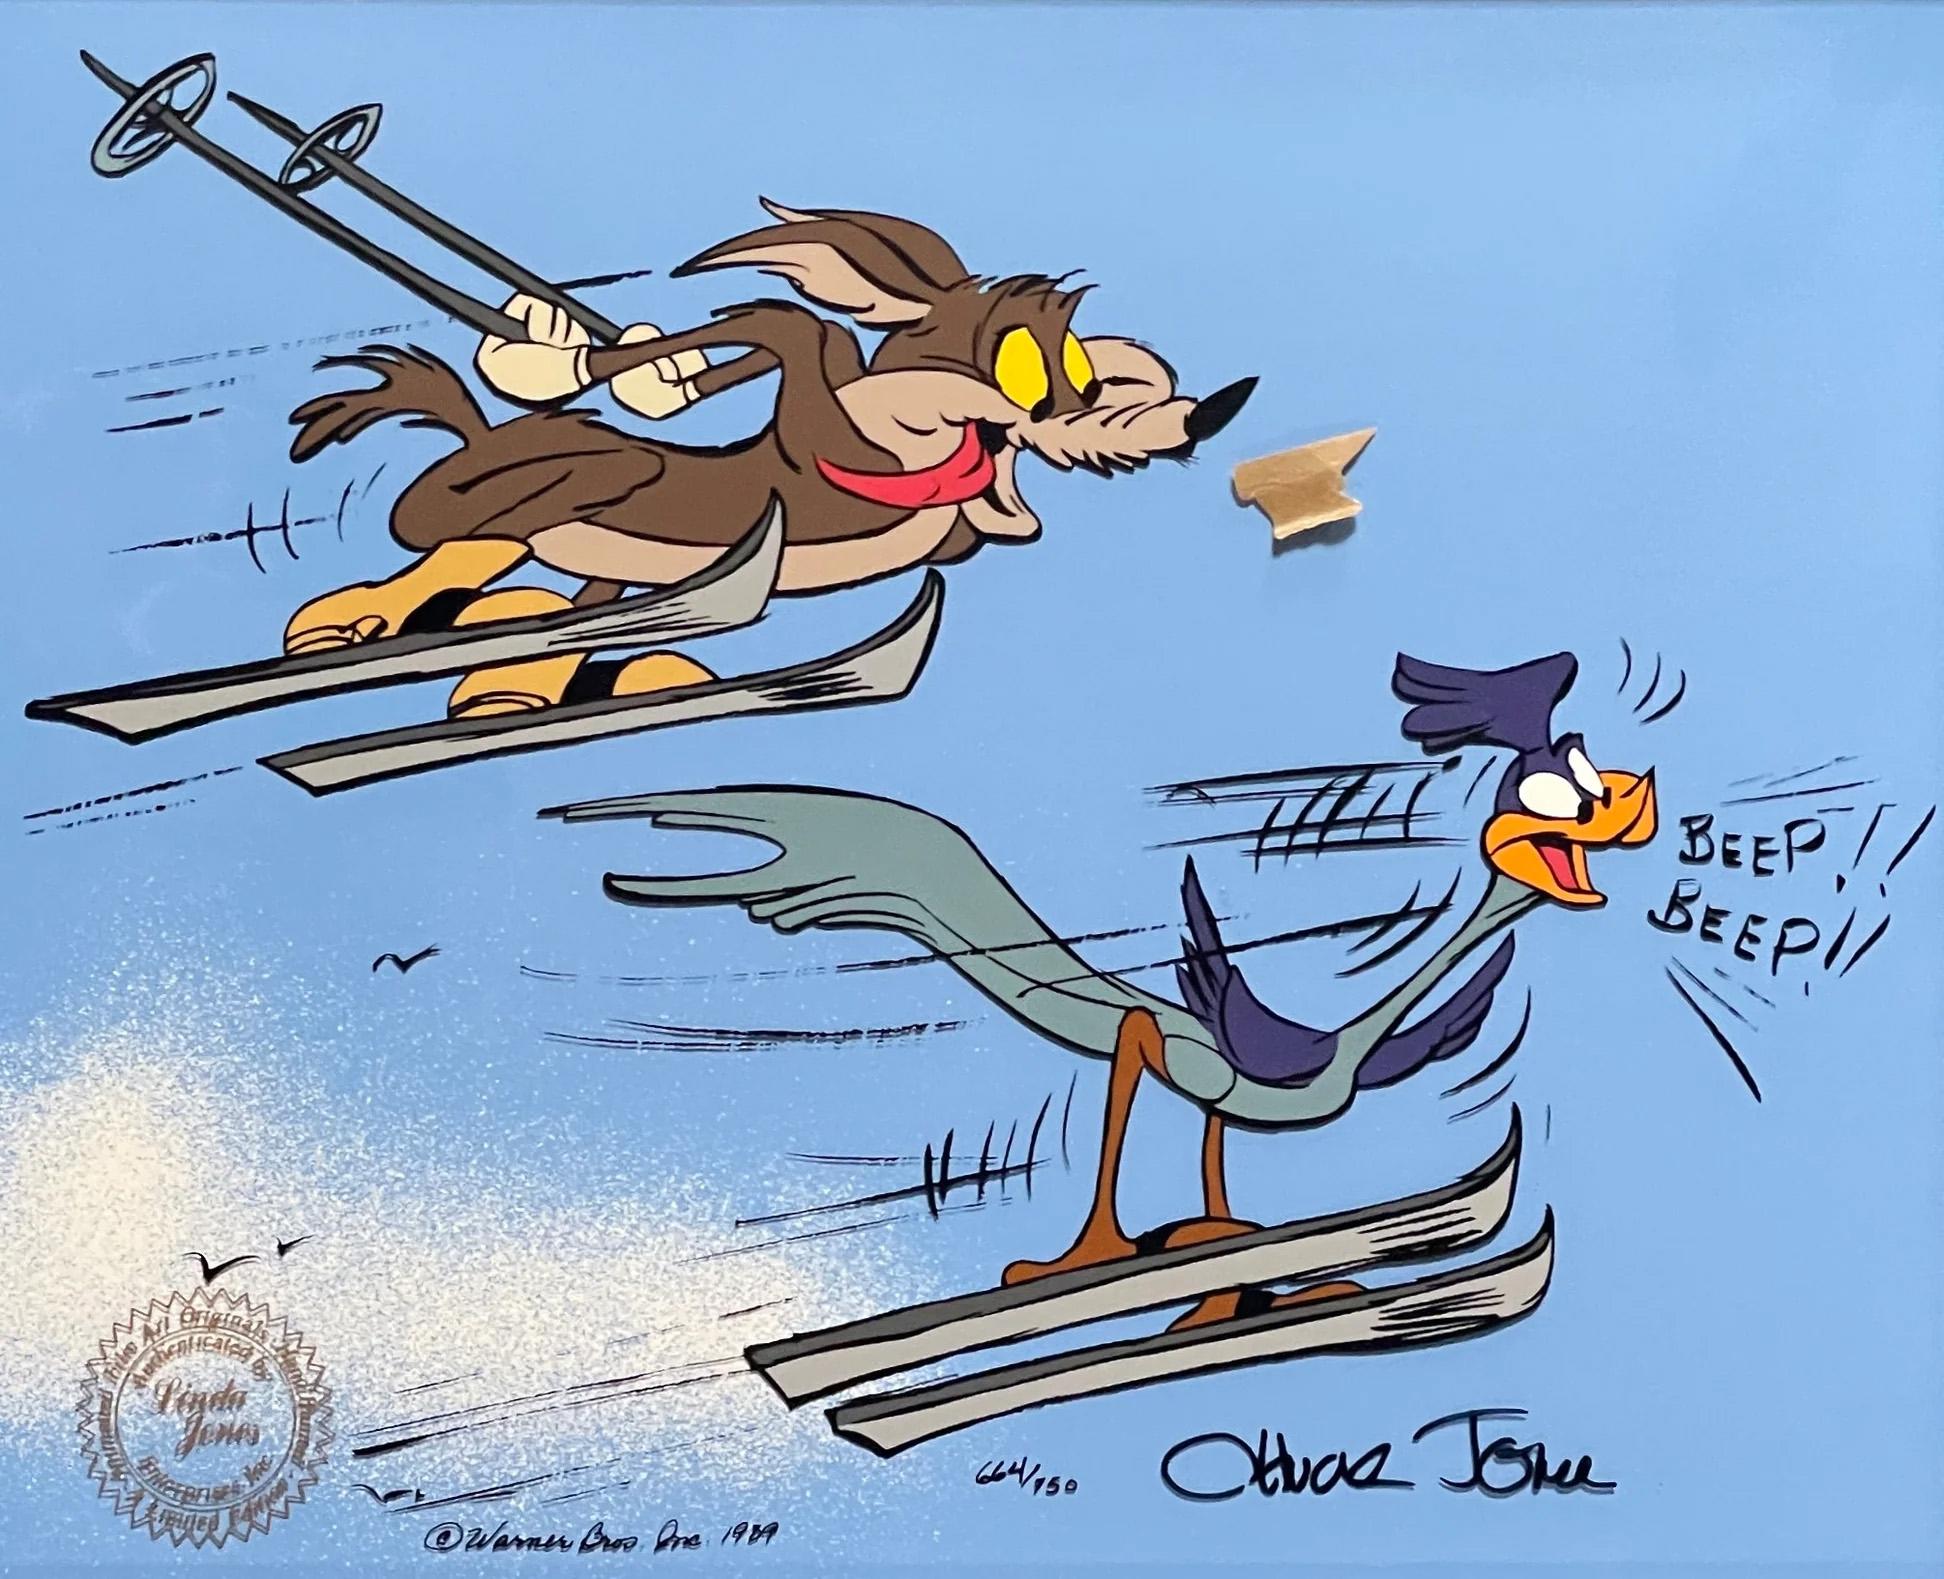 MEDIUM: Limited Edition Cel
IMAGE SIZE: 12 Field
EDITION SIZE: 750
SKU: CCV2741

Framing included in price.

ABOUT THE IMAGE: This cel is hand-signed by Chuck Jones and is numbered 664/750.